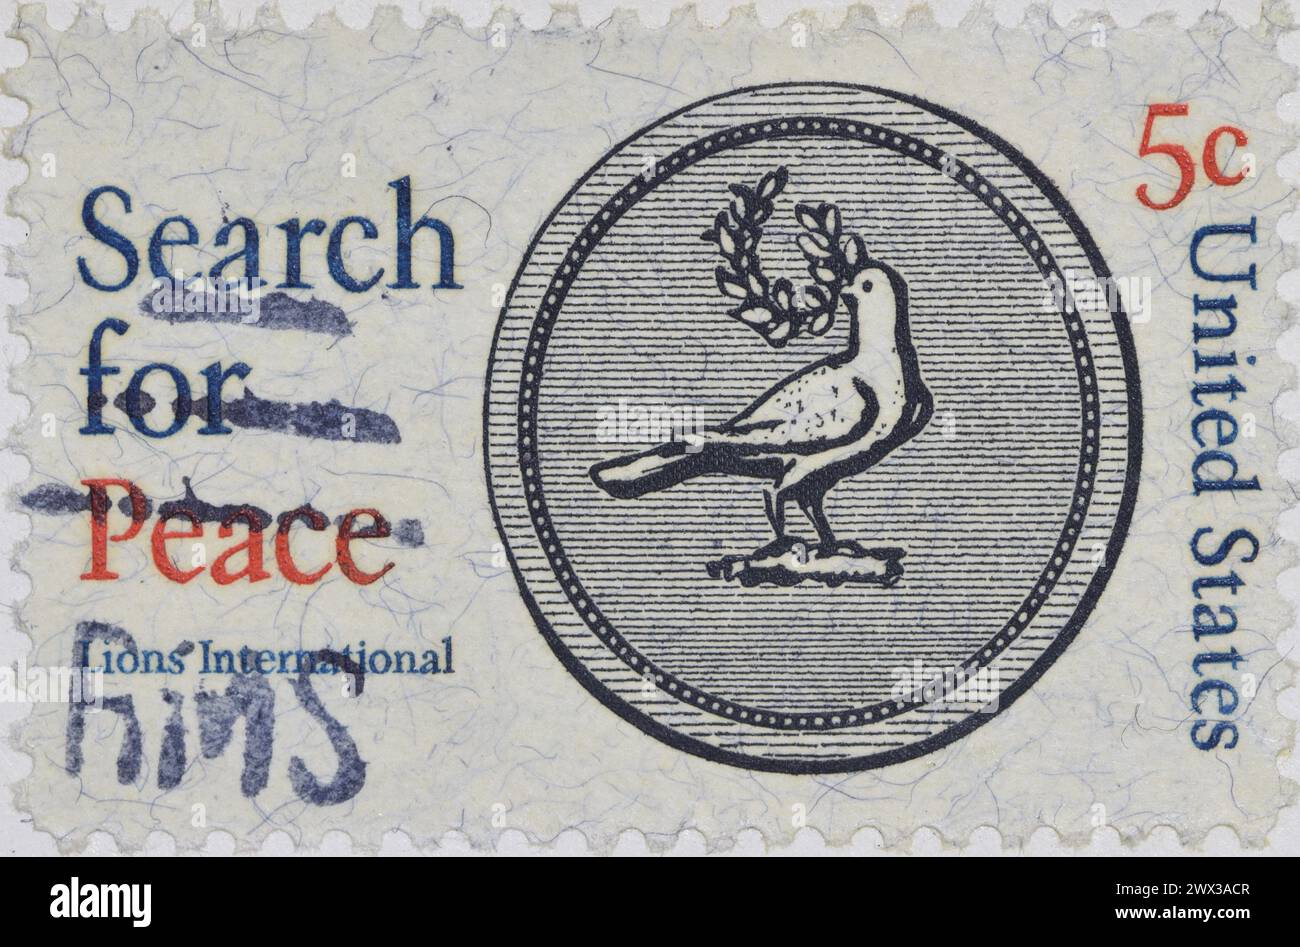 USA postage stamp on Lions International's SEARCH FOR PEACE school essay contest. Dove with olive wreath. Hand-cancelled 'RMS' (Railway Mail Service). Stock Photo